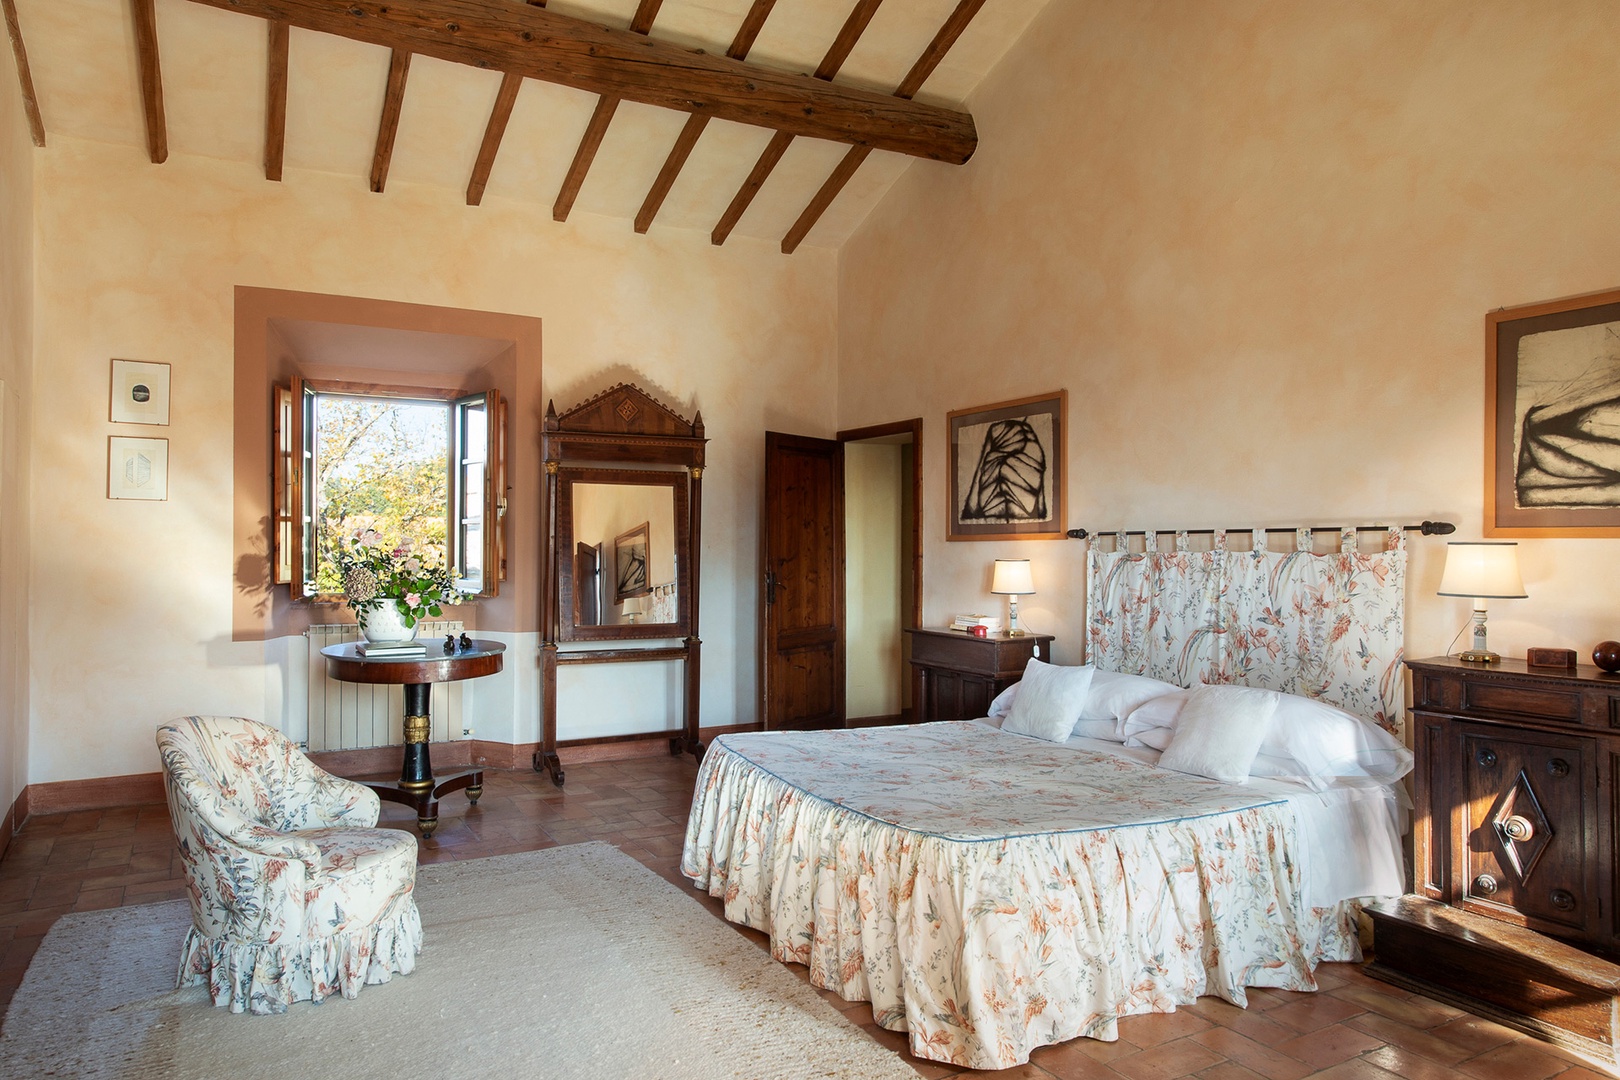 Restful bedroom with windows overlooking the garden and olive orchards to one side.